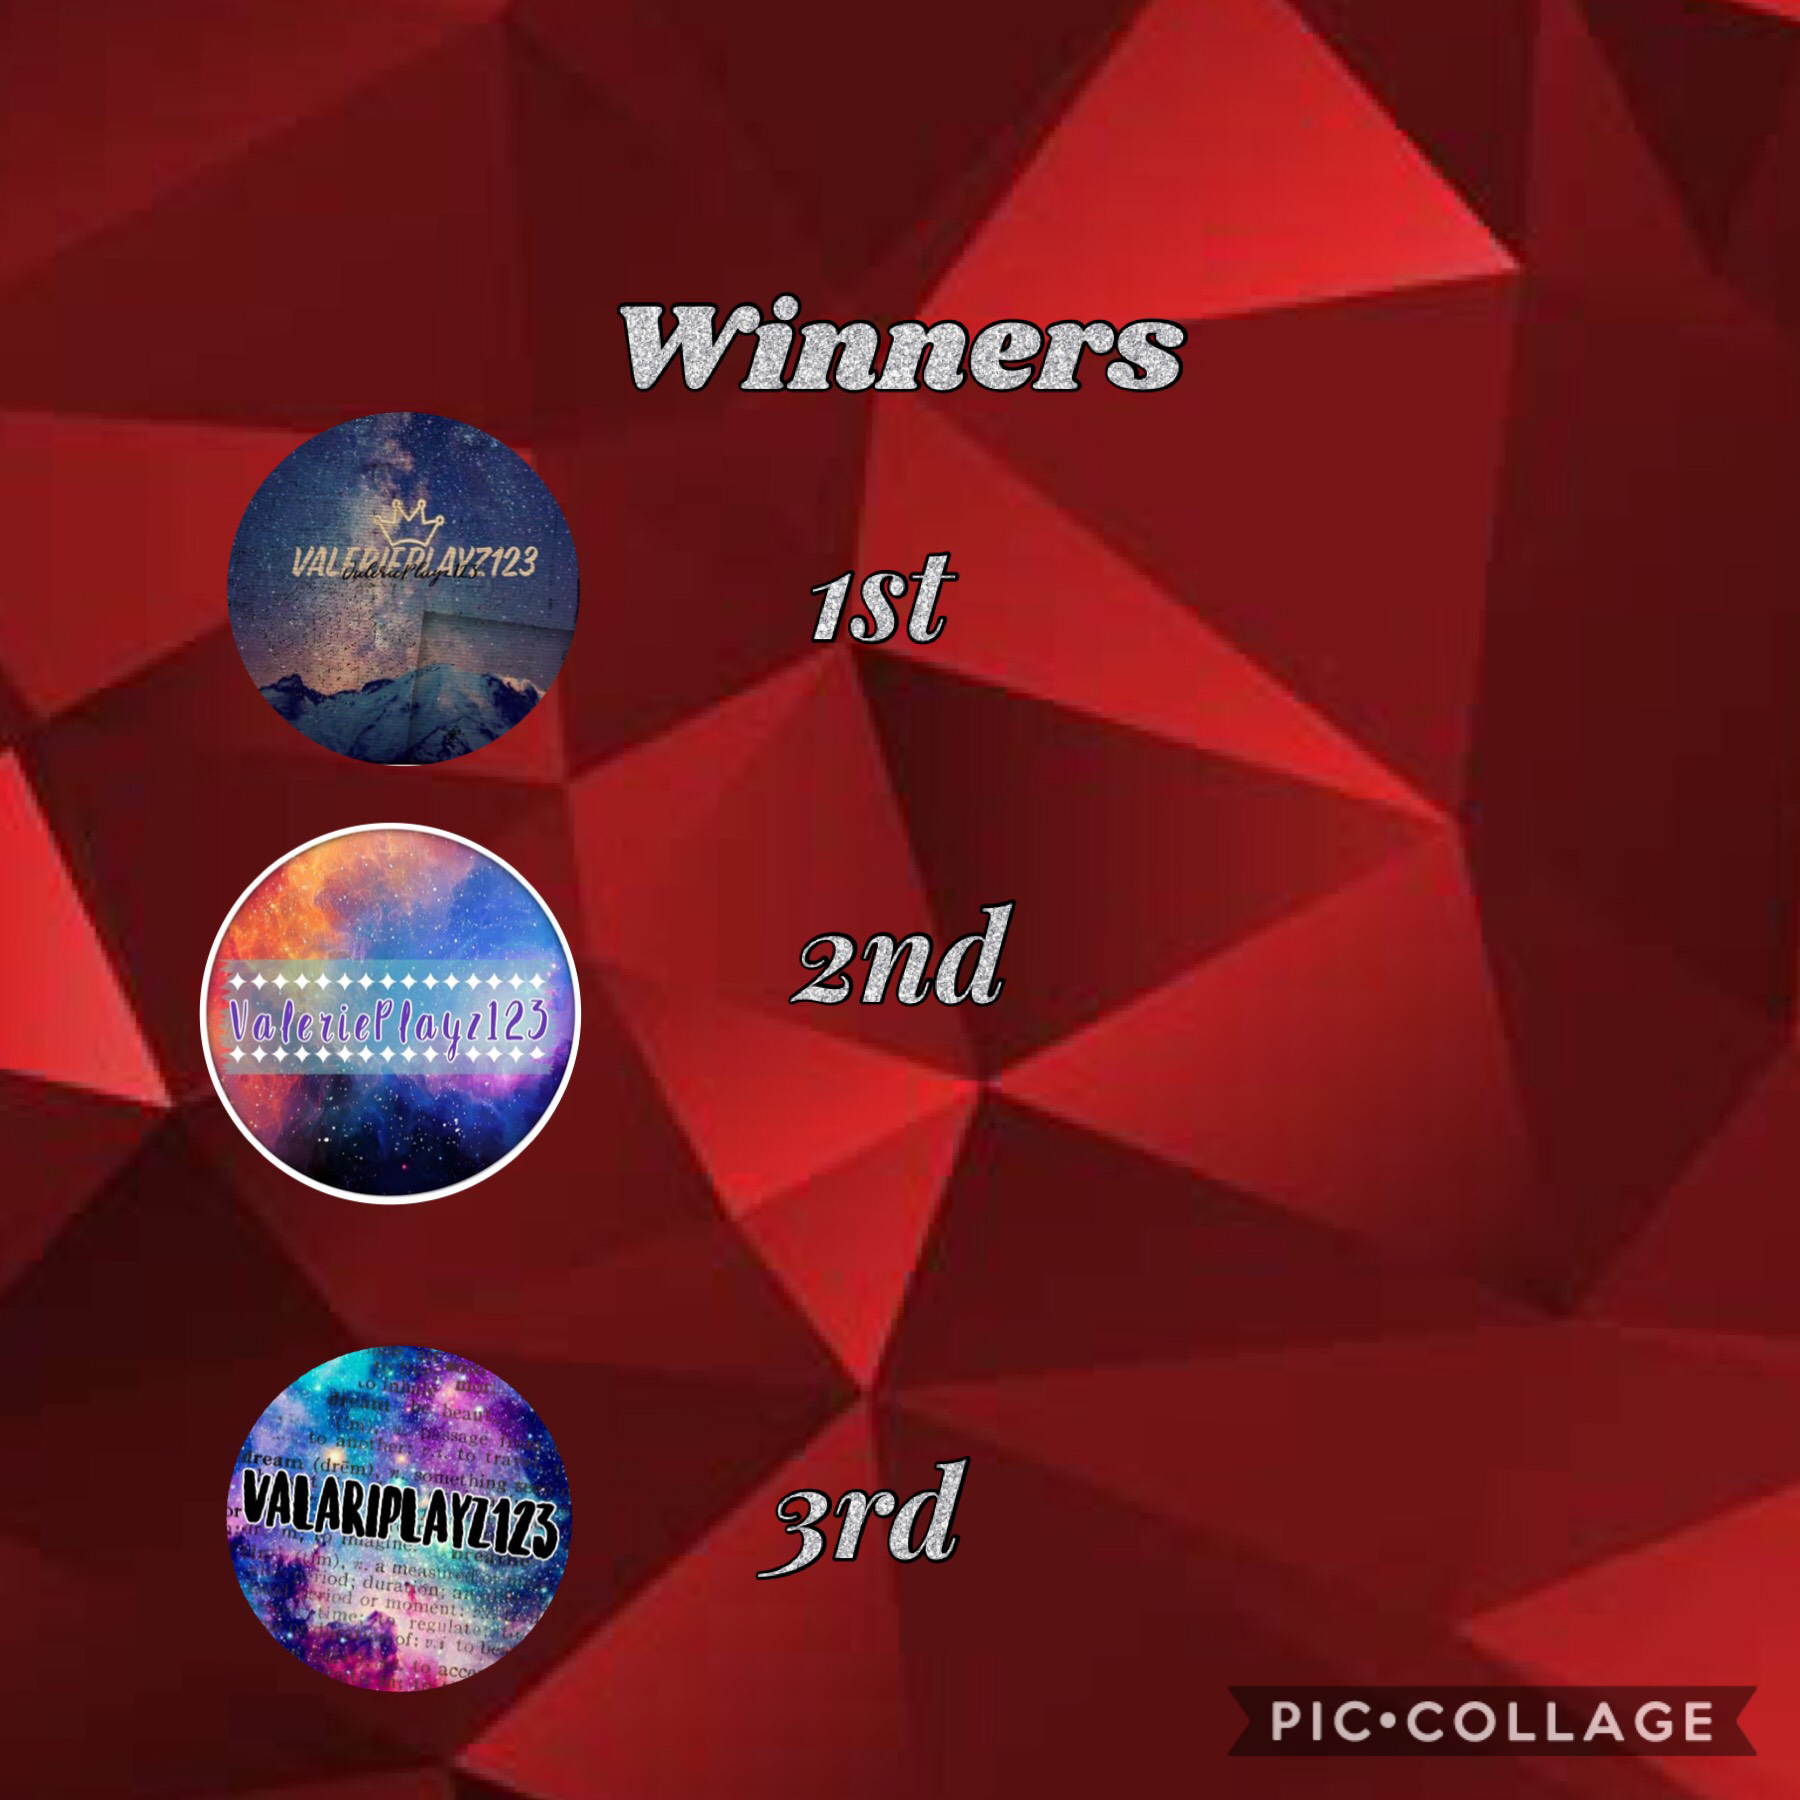 Please check if your the winner